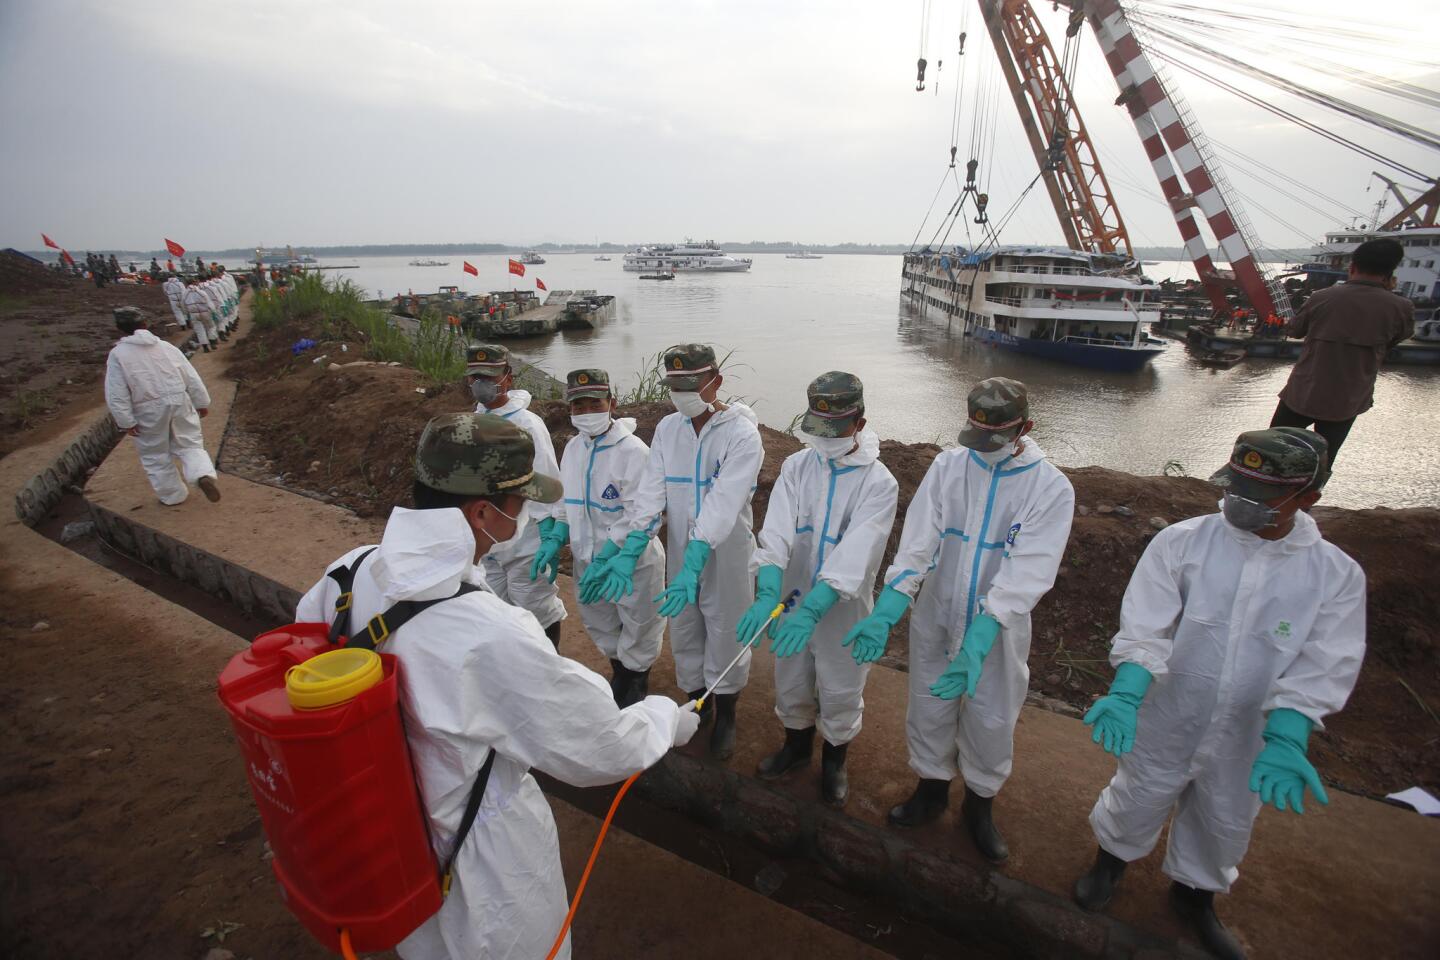 Rescuers are decontaminated at the site of the Eastern Star recovery operation in Jianli, China.